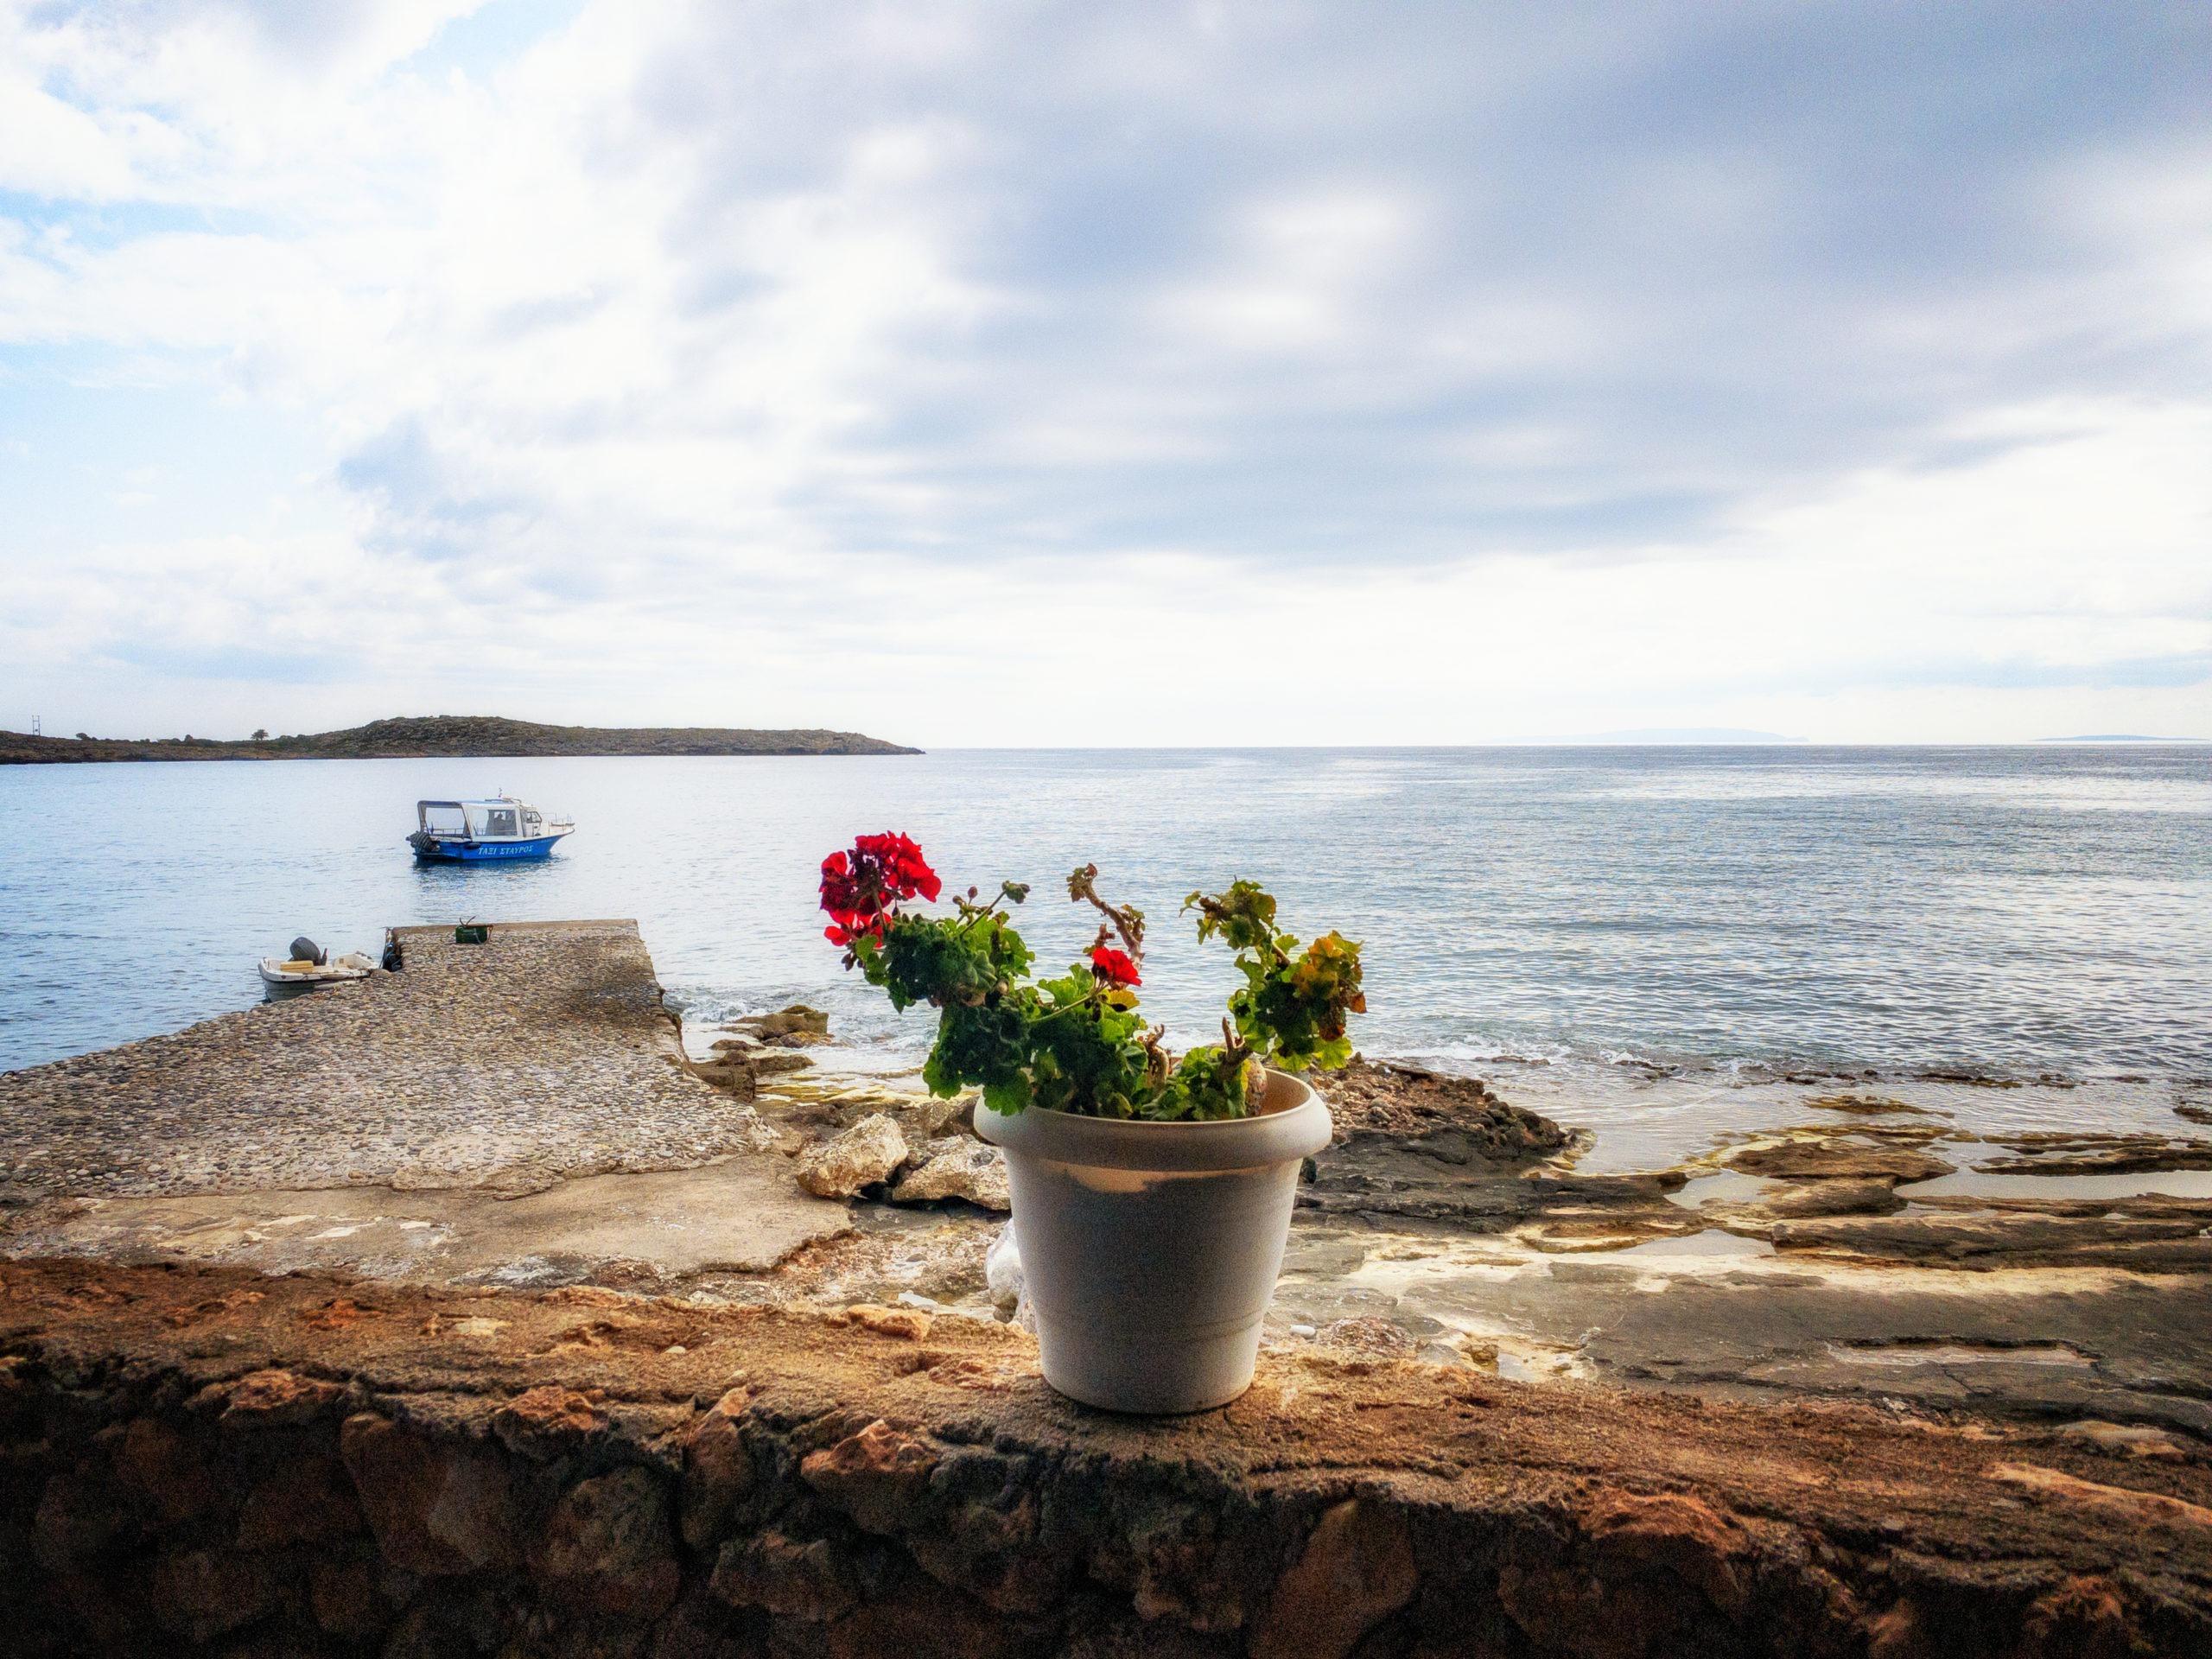 spring flower in a rustic pot on concrete dock, a boat and calm sea in the background.